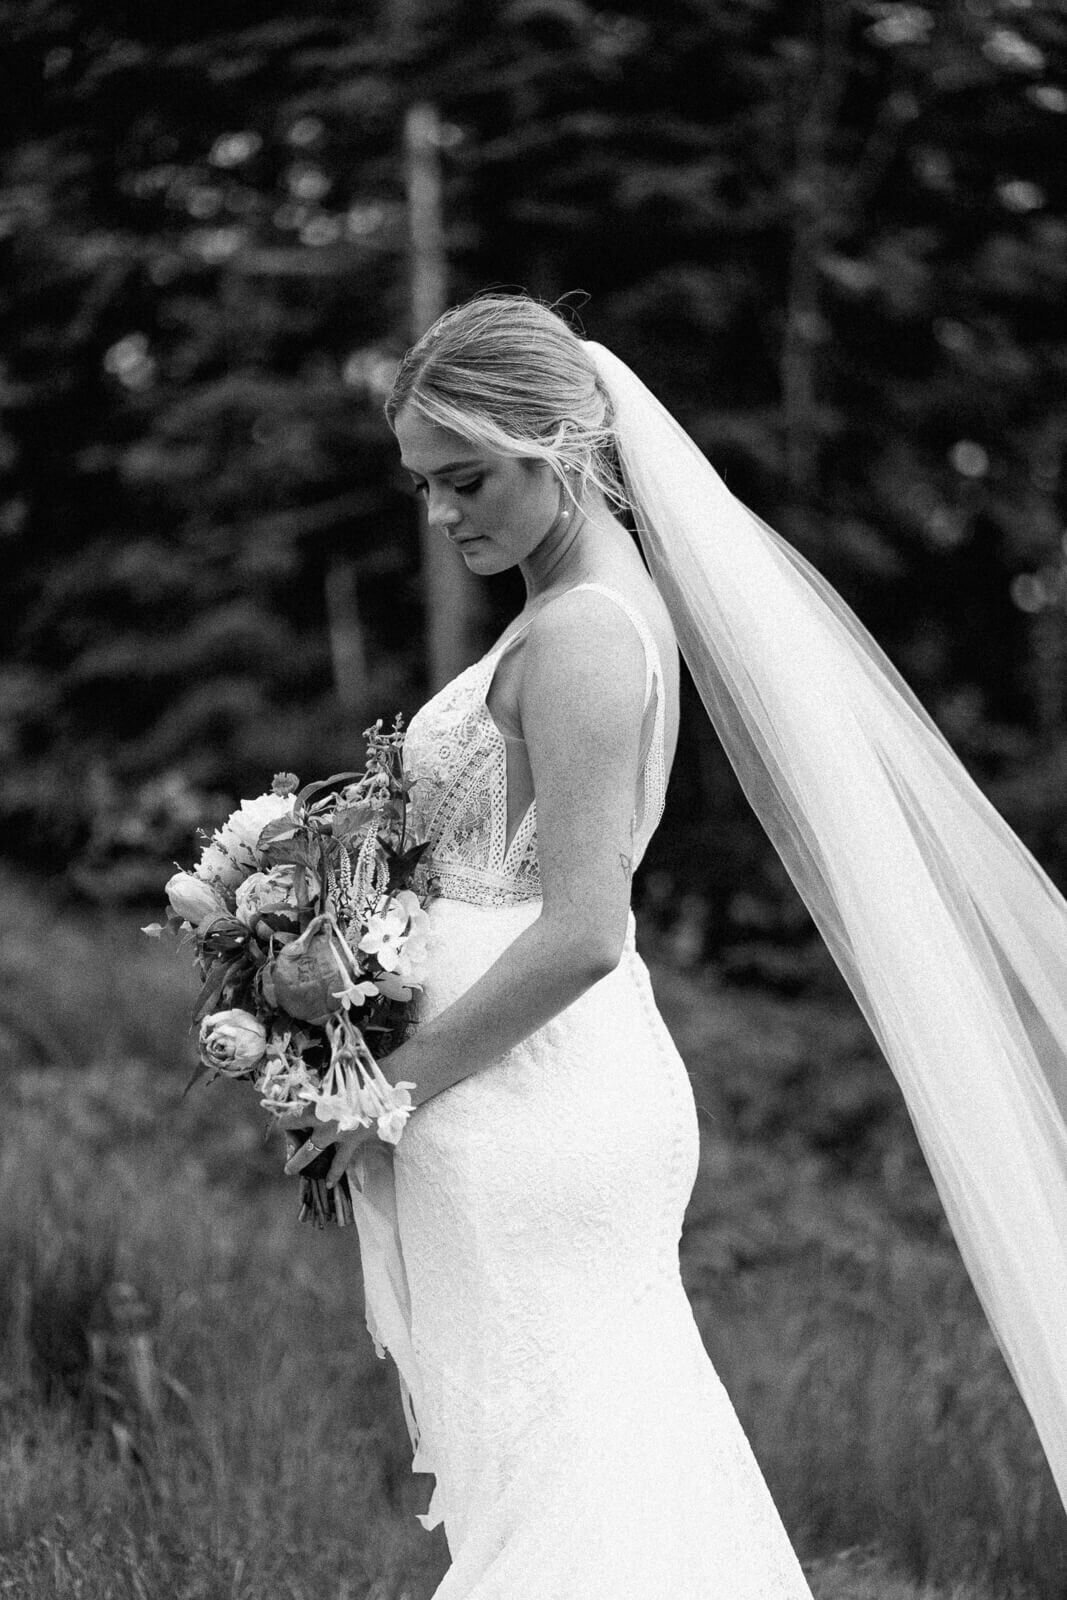 Black and white image of bride with veil looking at flower